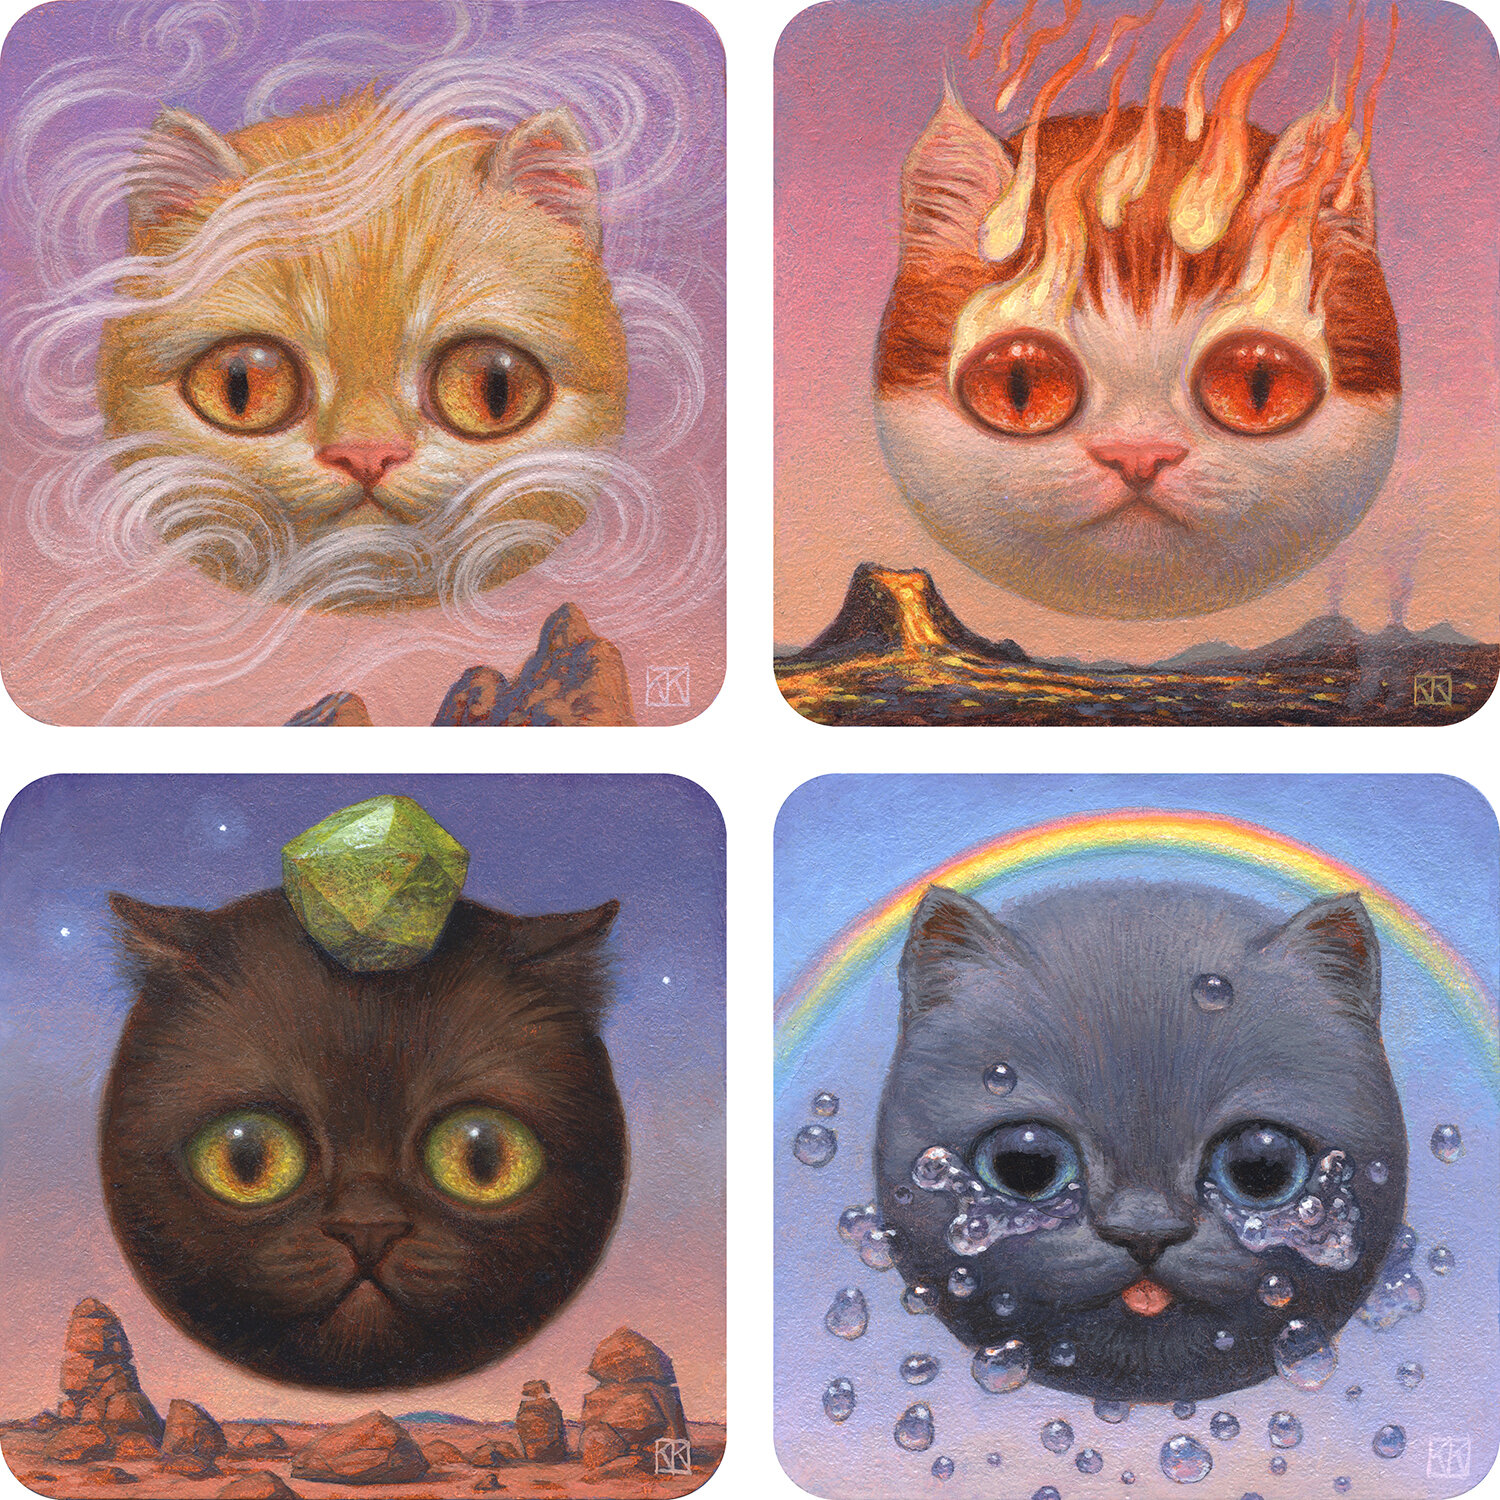 Ceshire Kittens - Air, Fire, Earth, Water